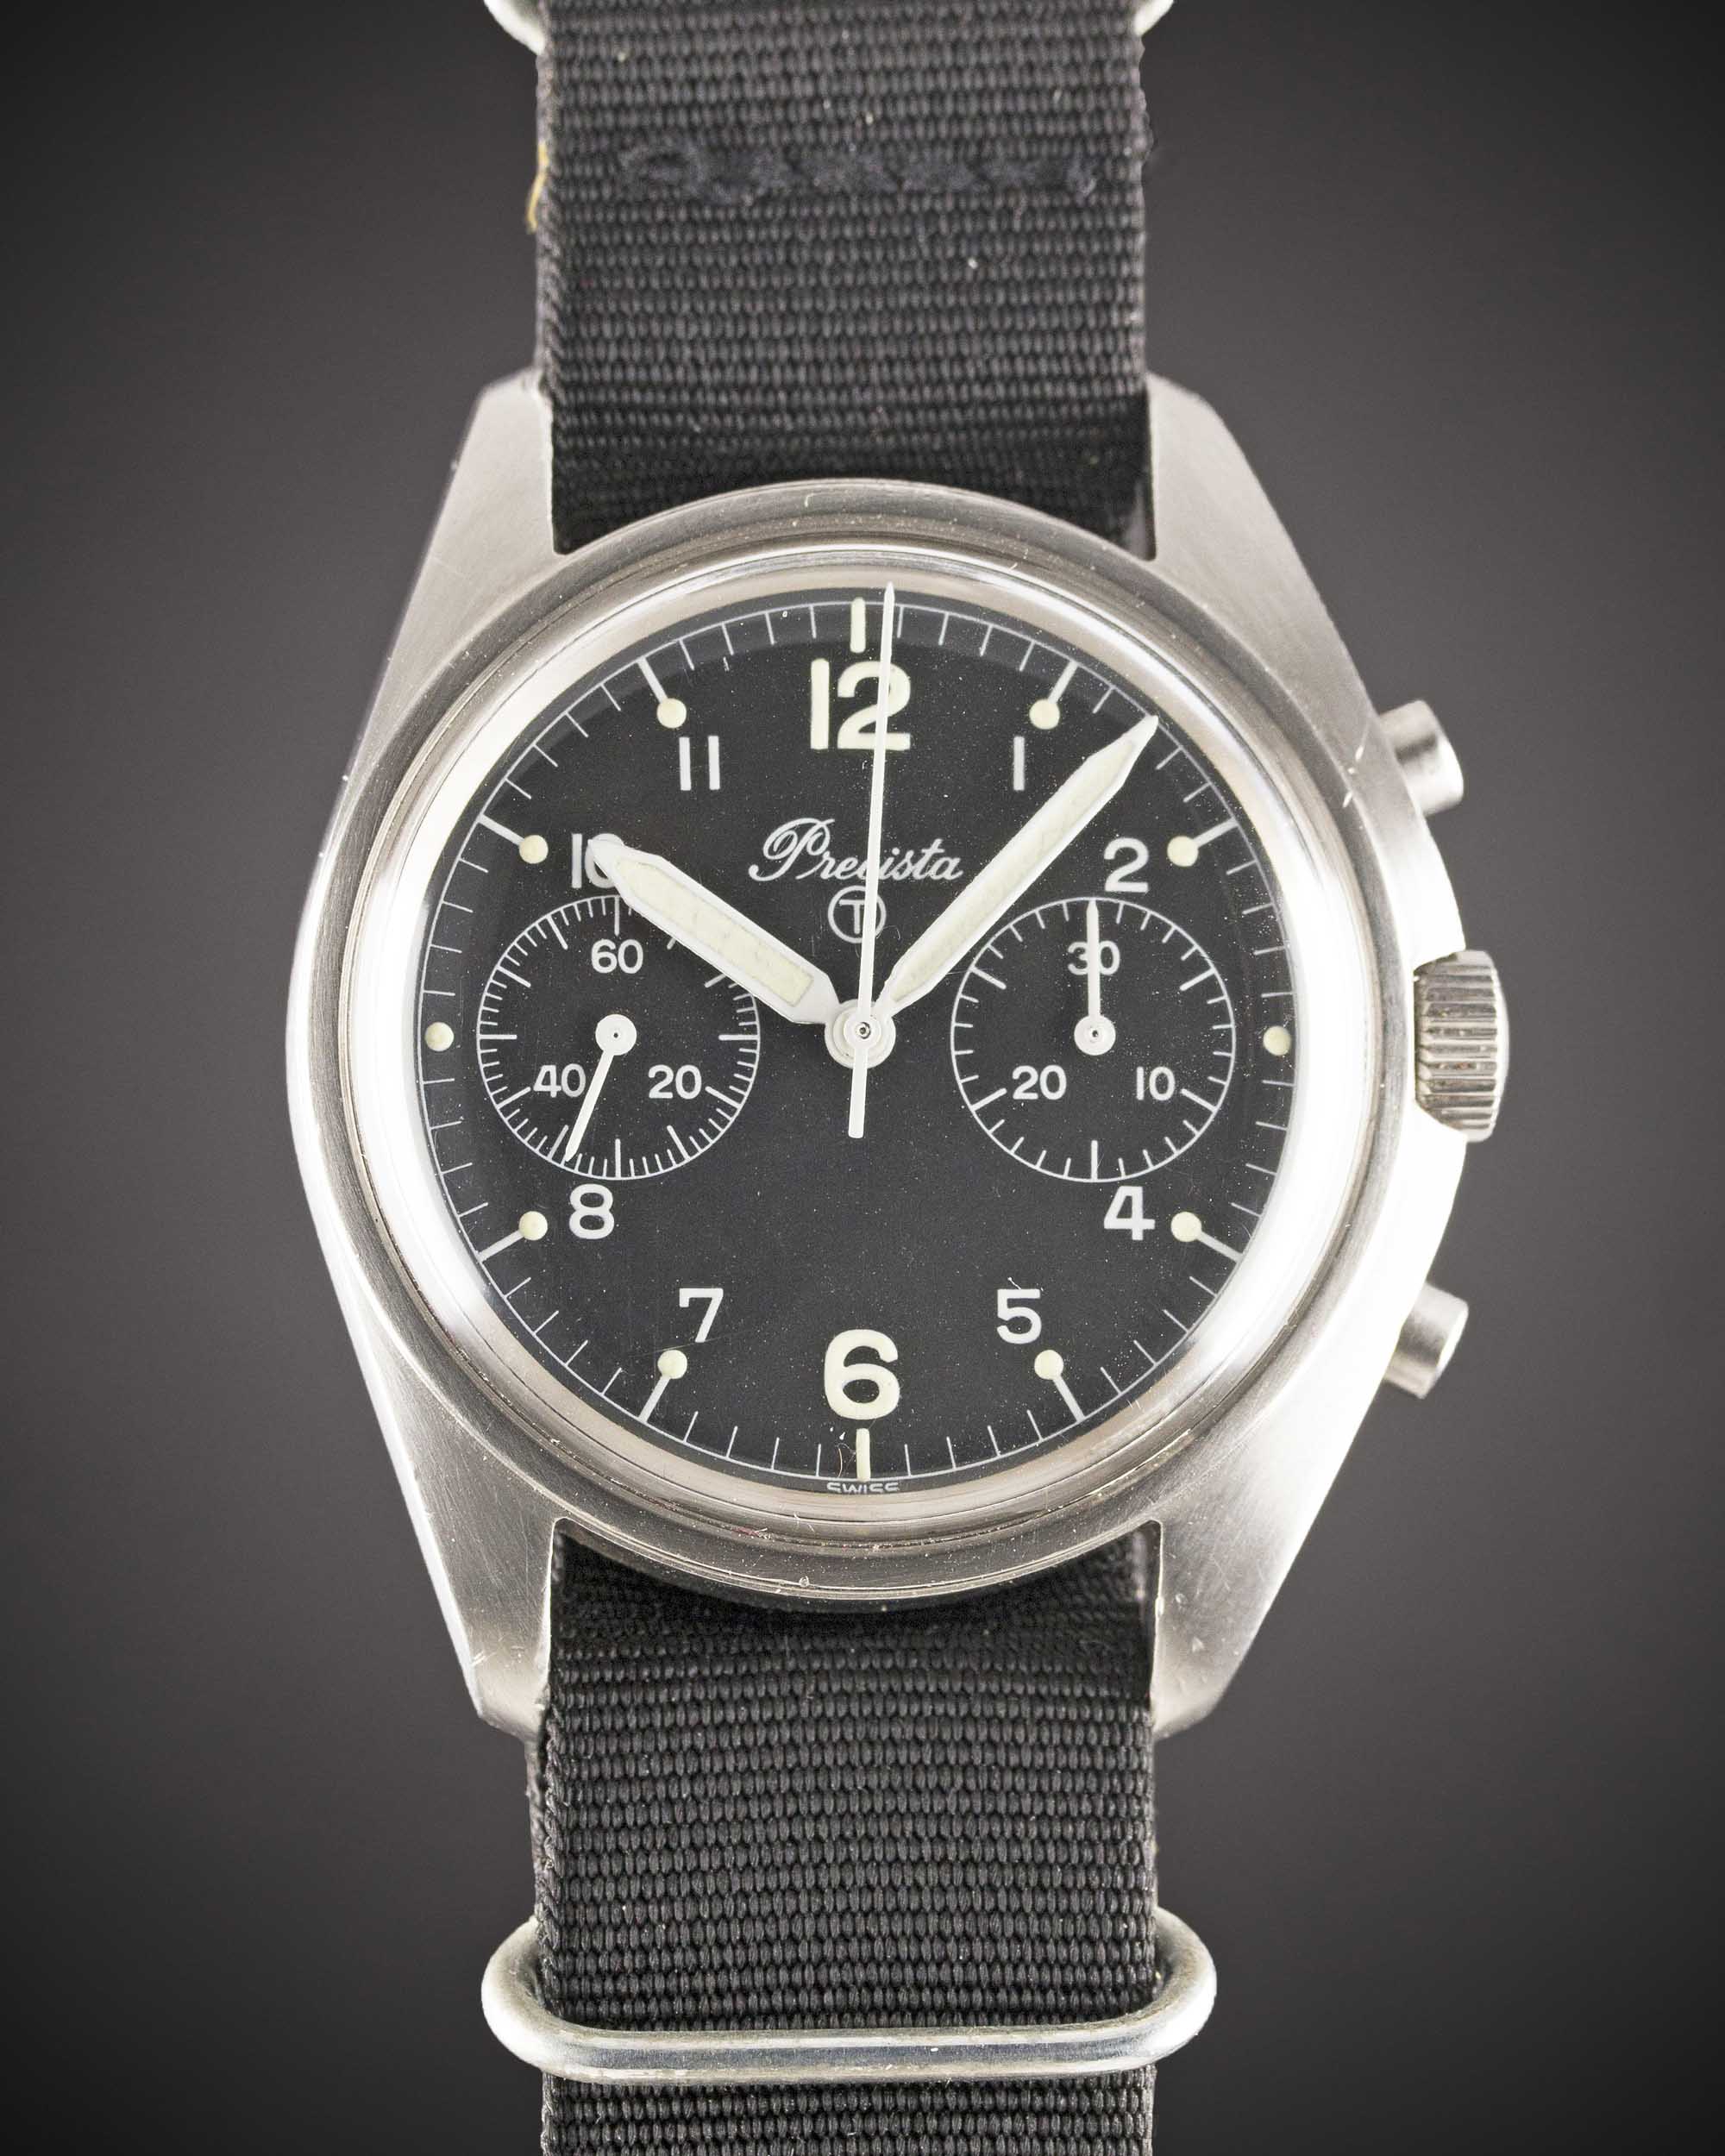 A COMPLETE SET OF GENTLEMAN'S STAINLESS STEEL BRITISH MILITARY "FAB FOUR" RAF PILOTS CHRONOGRAPH - Image 3 of 8